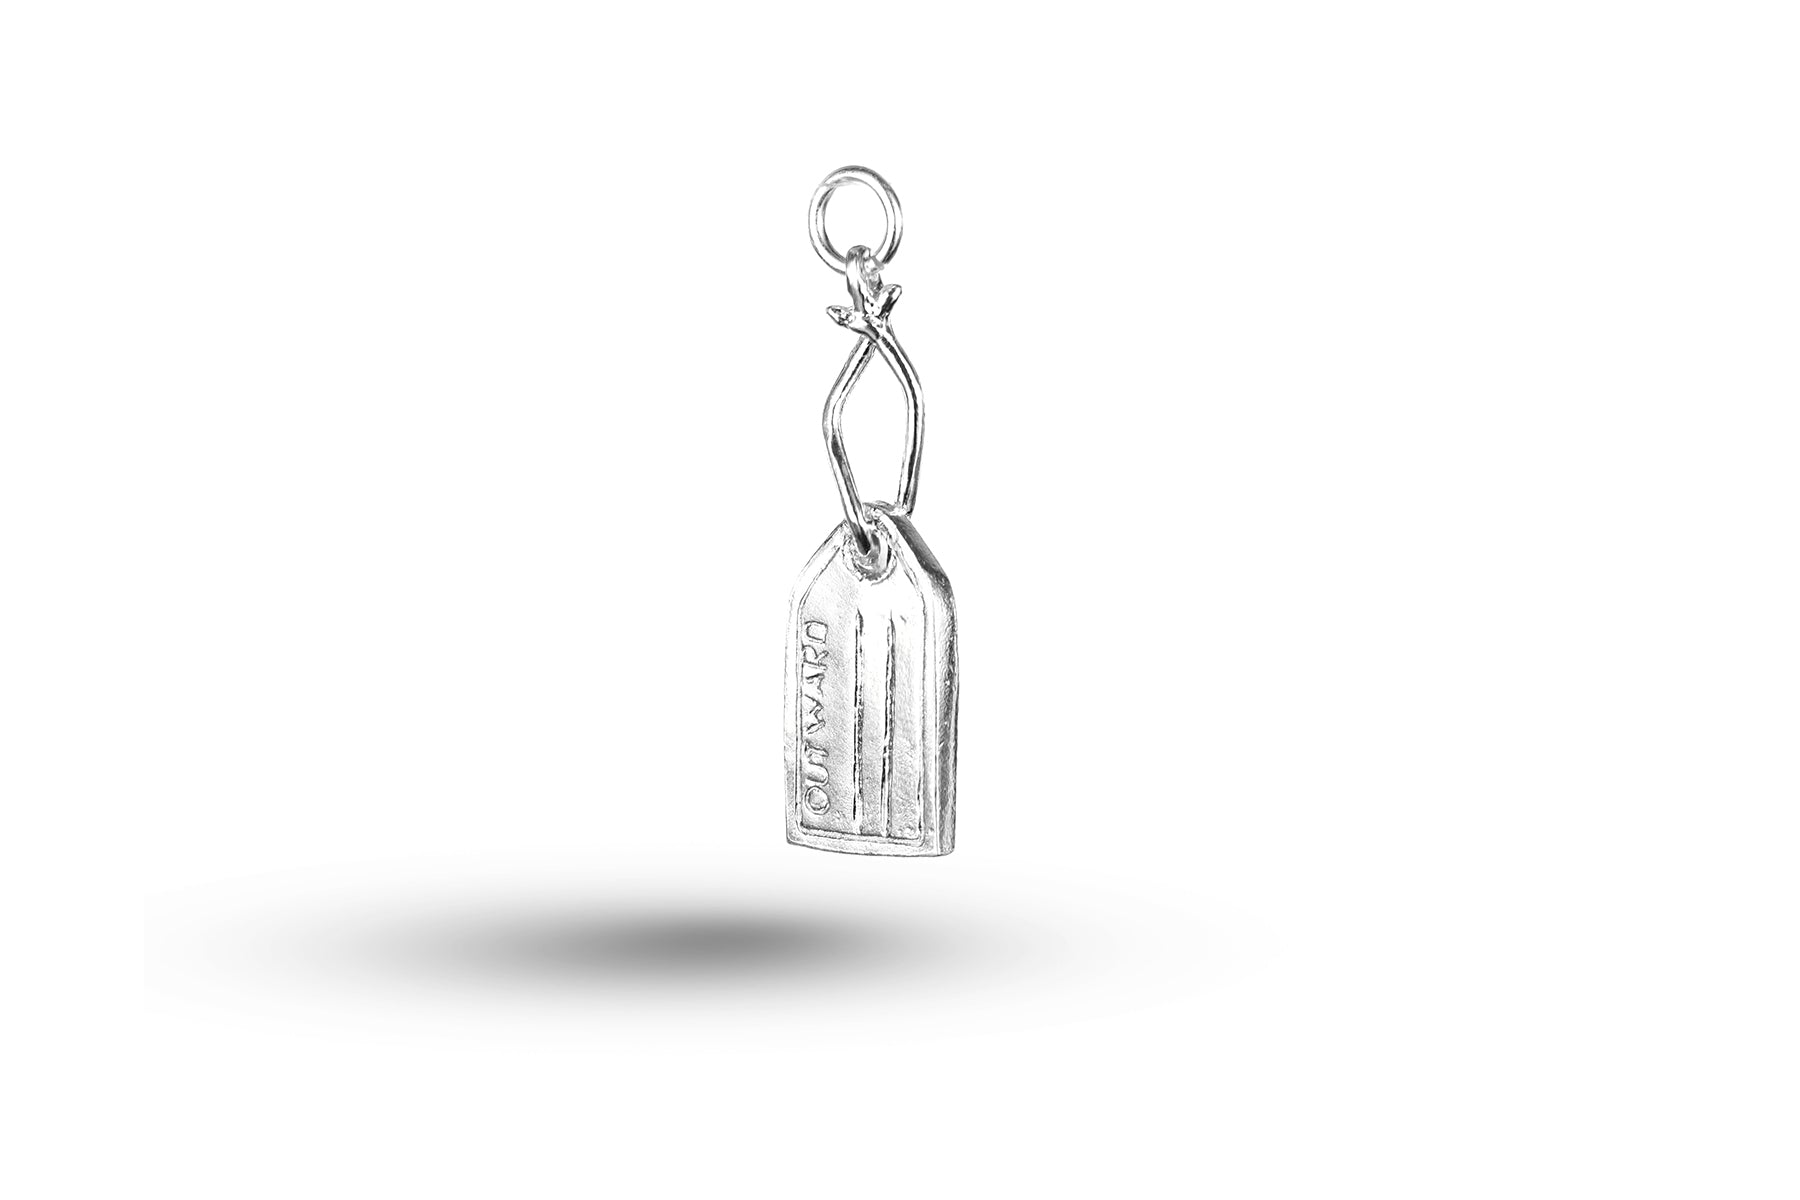 White gold Luggage Label charm.